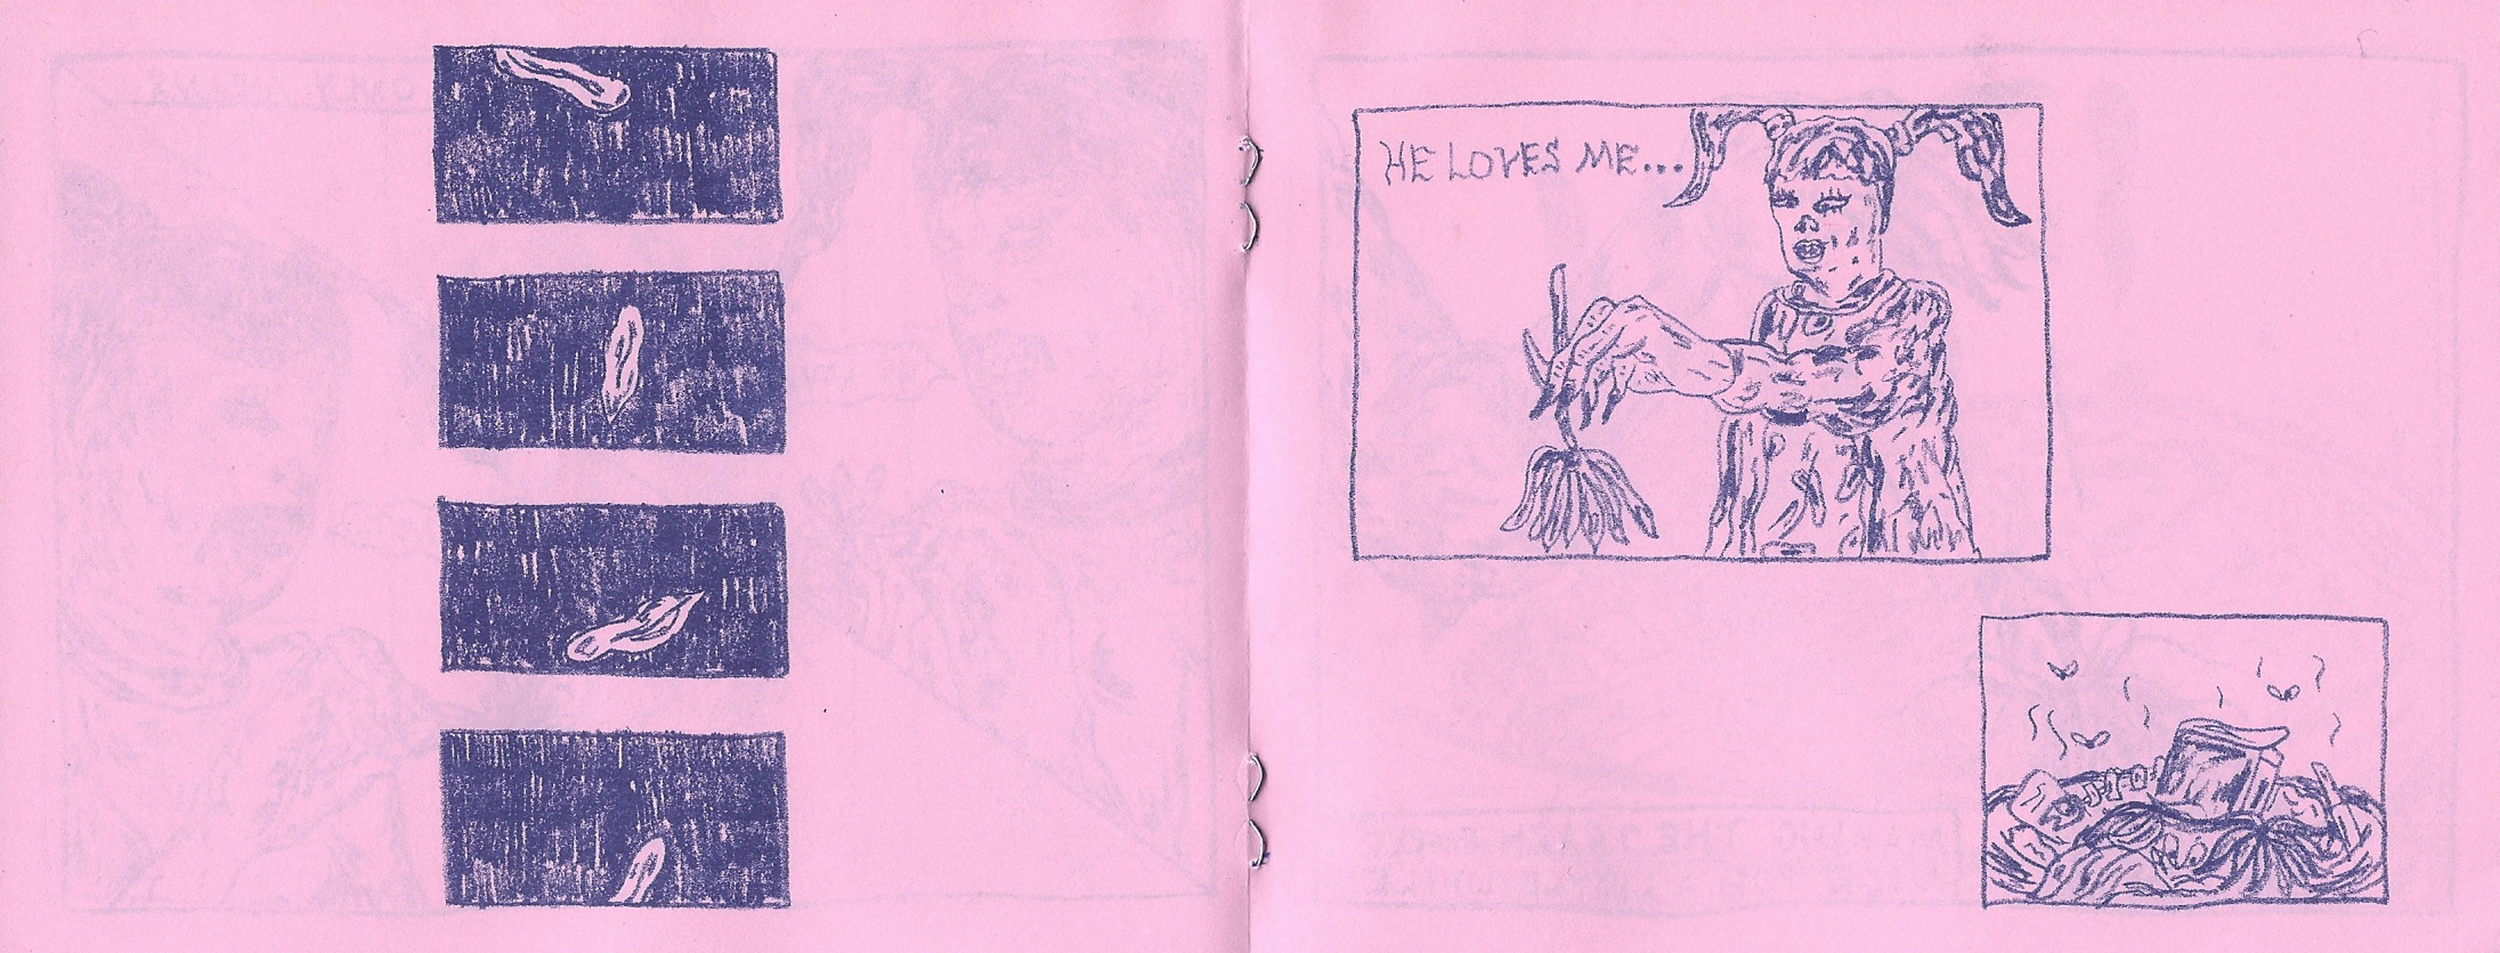 LOVE ME NOT page 3.jpg